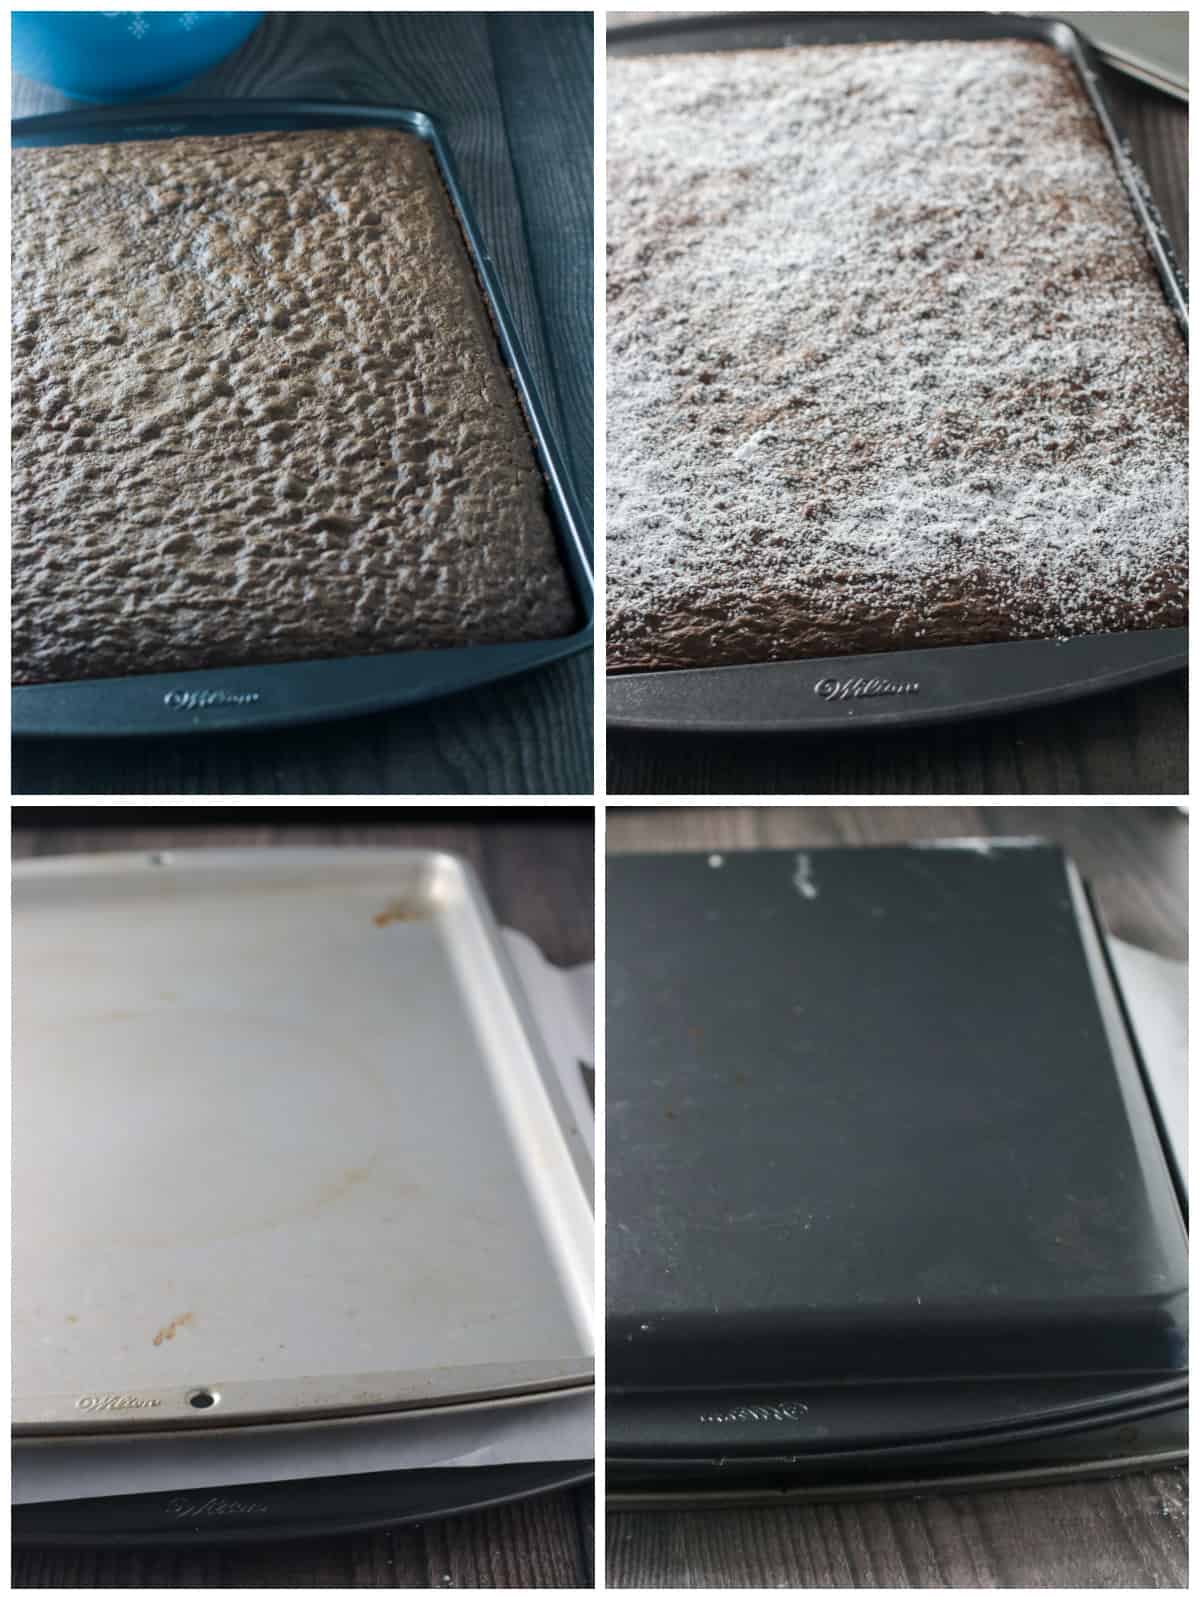 A collage showing the process of inverting a cake to remove the parchment backing.